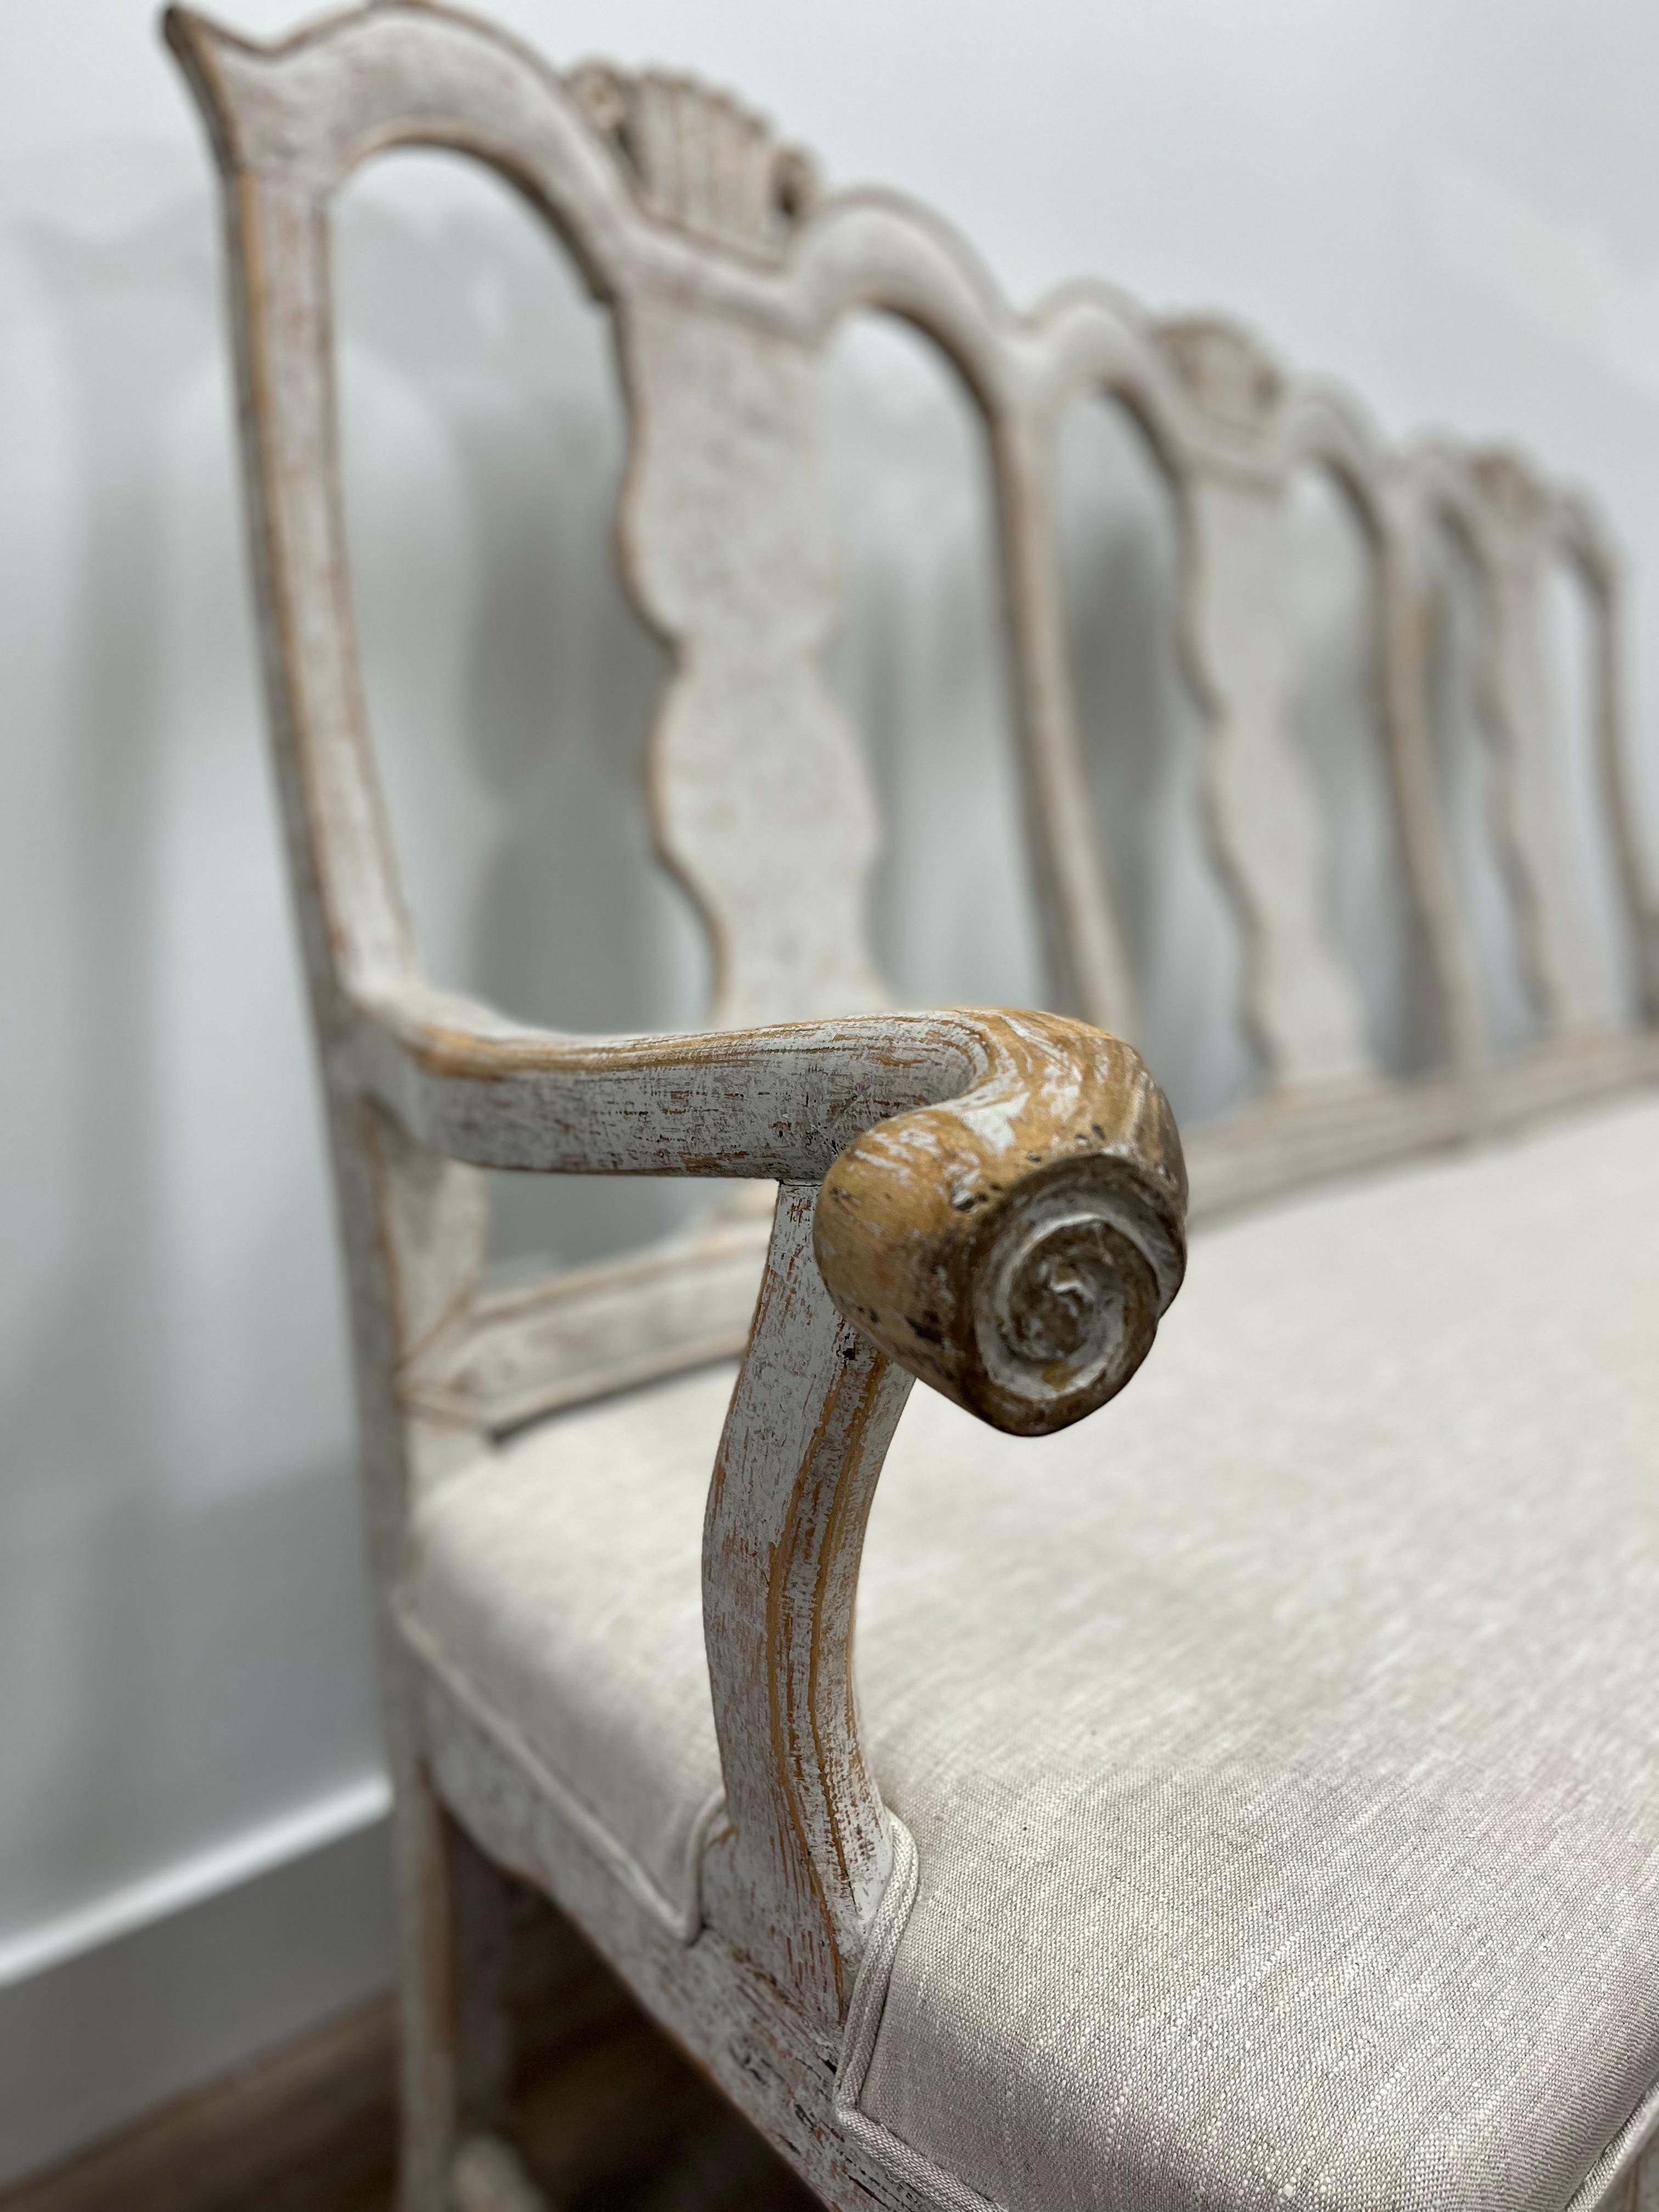 A Swedish Baroque sofa with outward bending arms and hand-turned ends. The arched back crowns have simple scroll detailing. Notches line the contours of the spines and back frame. A hand-carved swag squirt front with traces of vertical detailing.